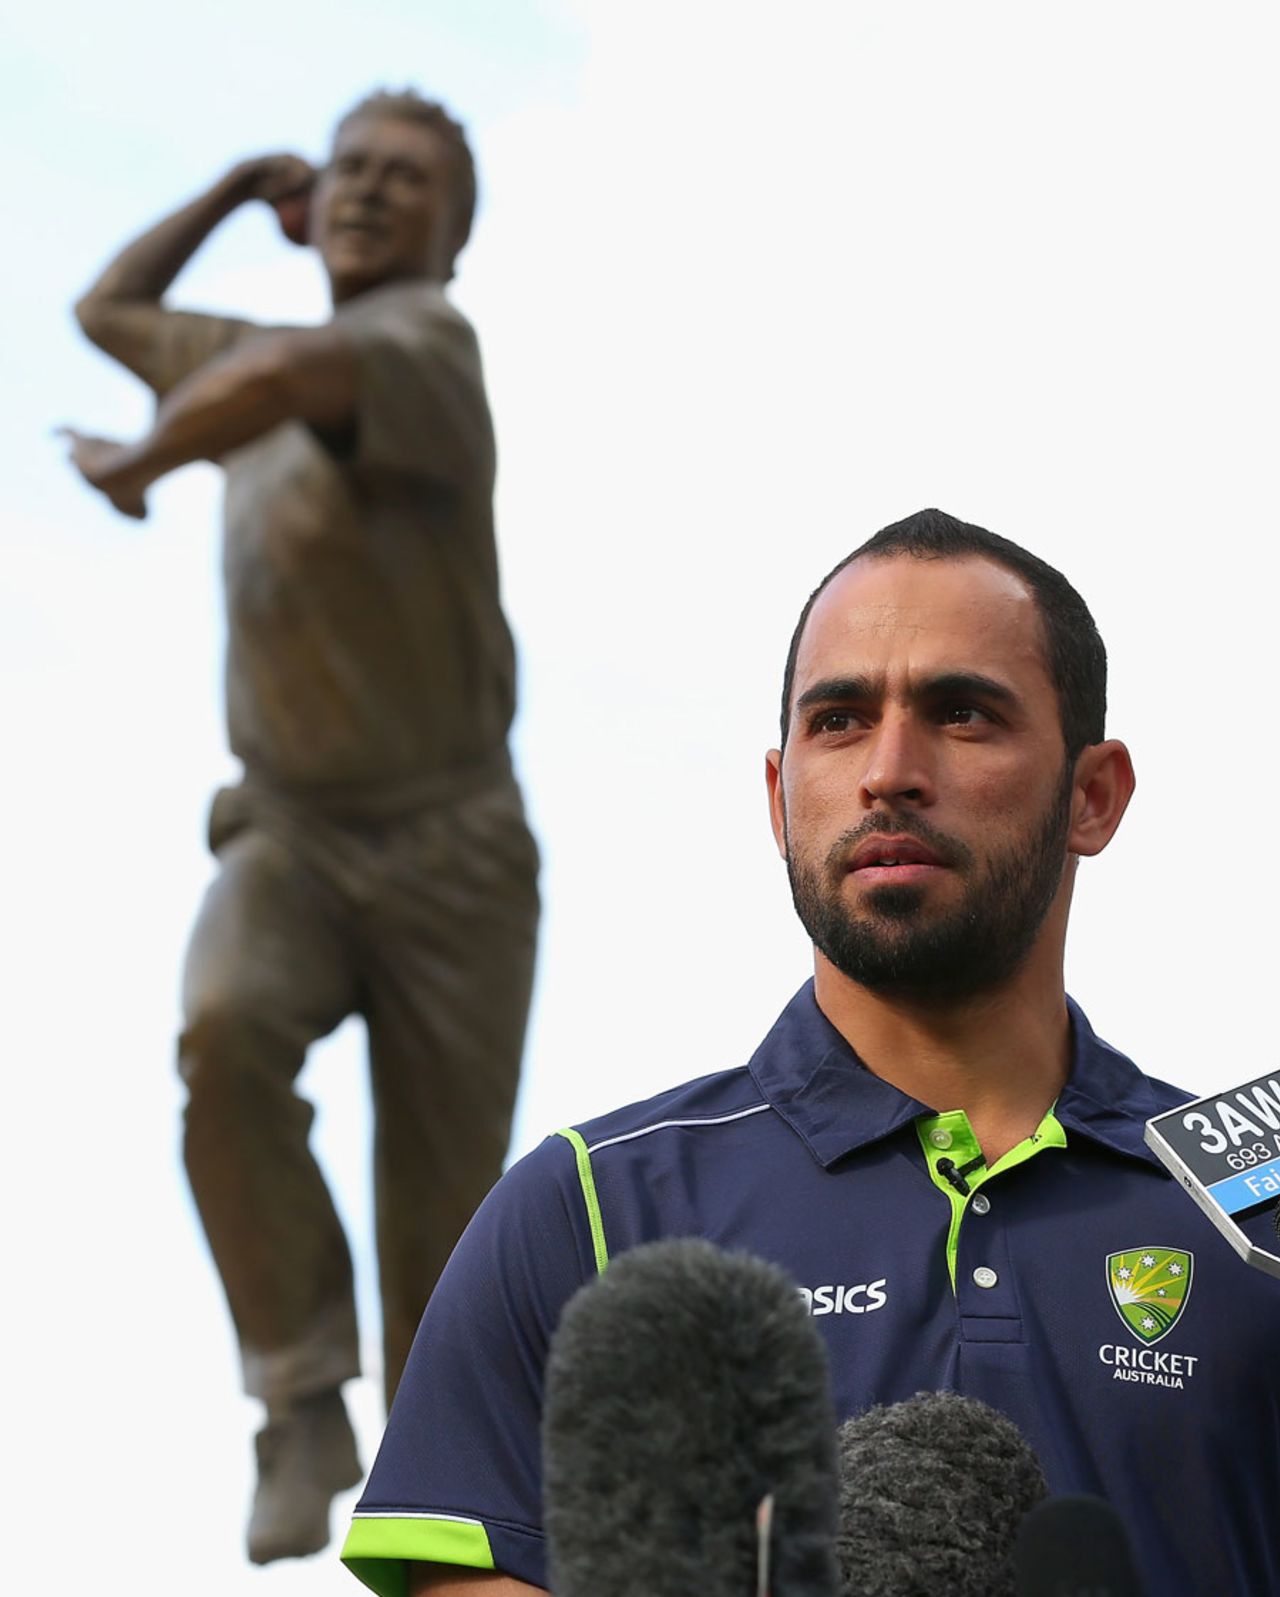 Fawad Ahmed talks to the media, Melbourne Cricket Ground, July 2, 2013